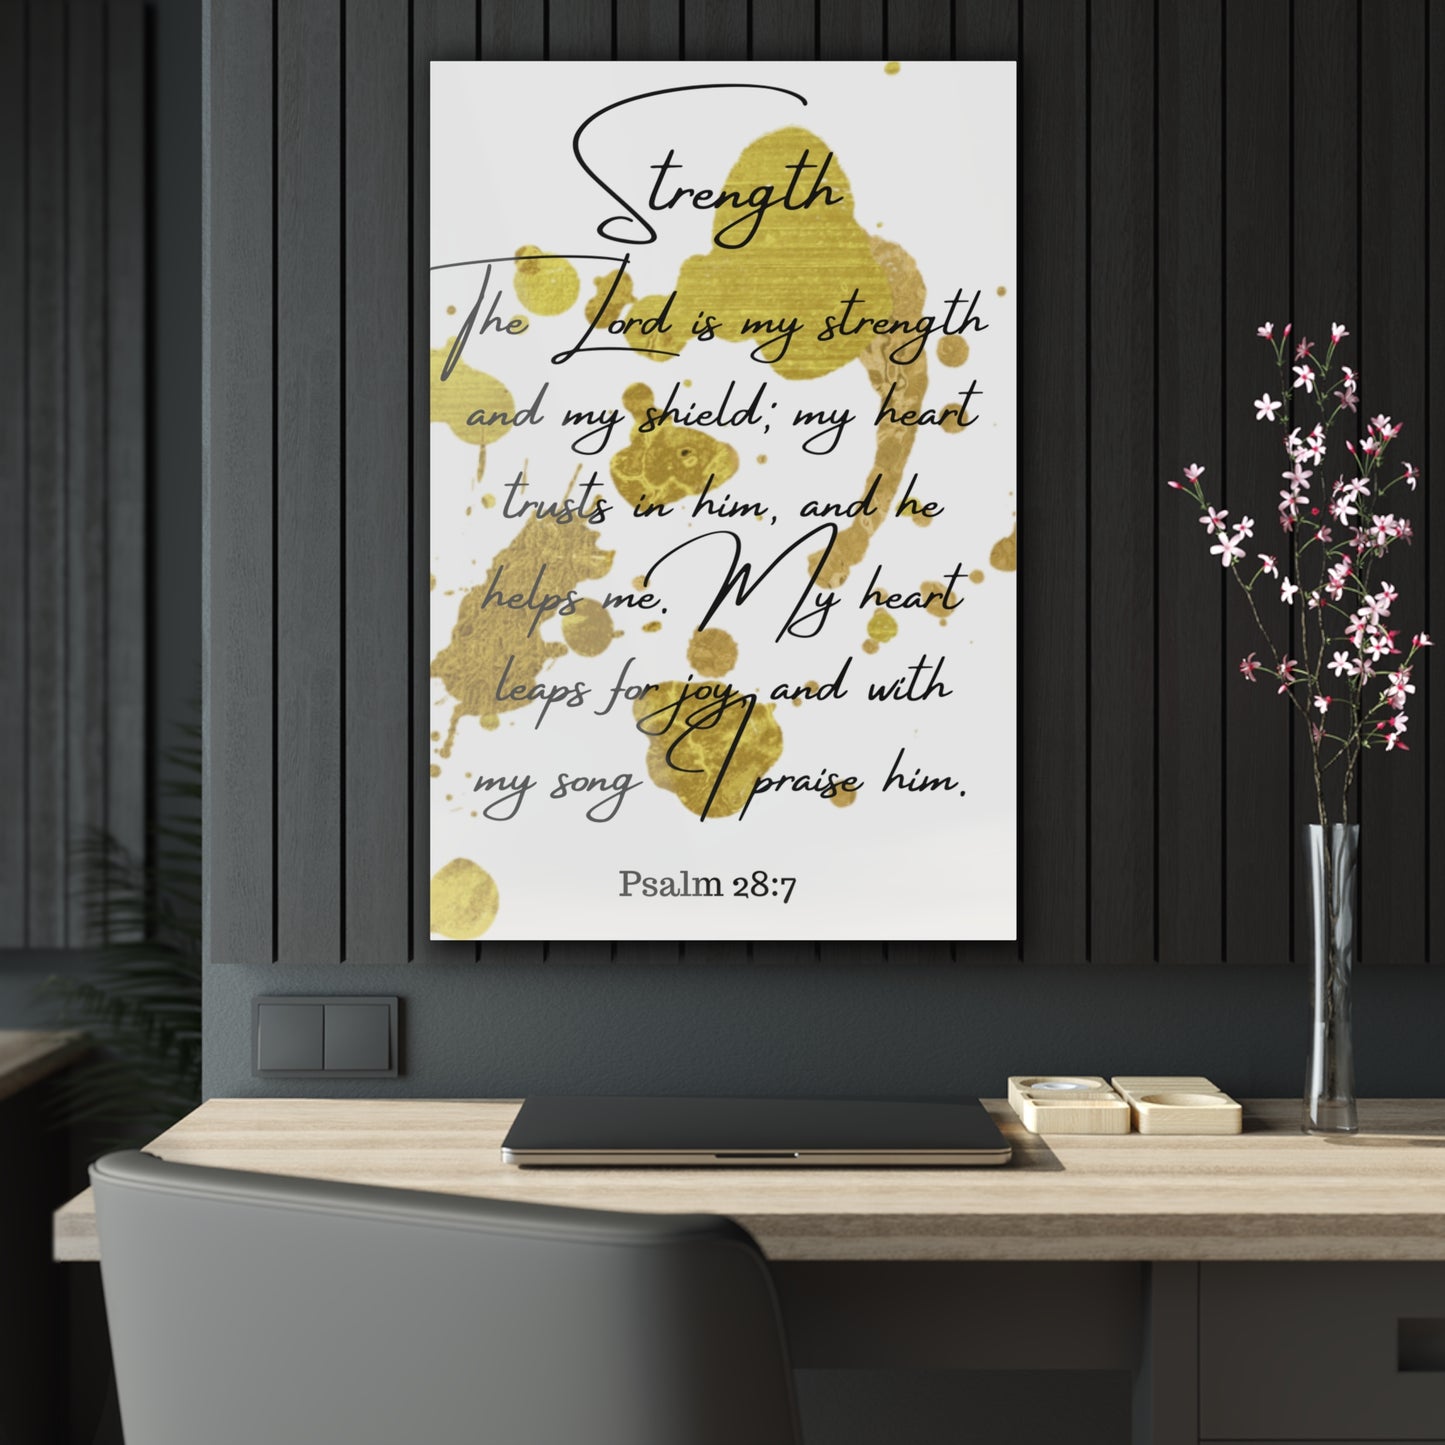 Scripture Art Deco Walls - Acrylic Print with Inspirational Verse | Art & Wall Decor,Assembled in the USA,Assembled in USA,Decor,Home & Living,Home Decor,Indoor,Made in the USA,Made in USA,Poster